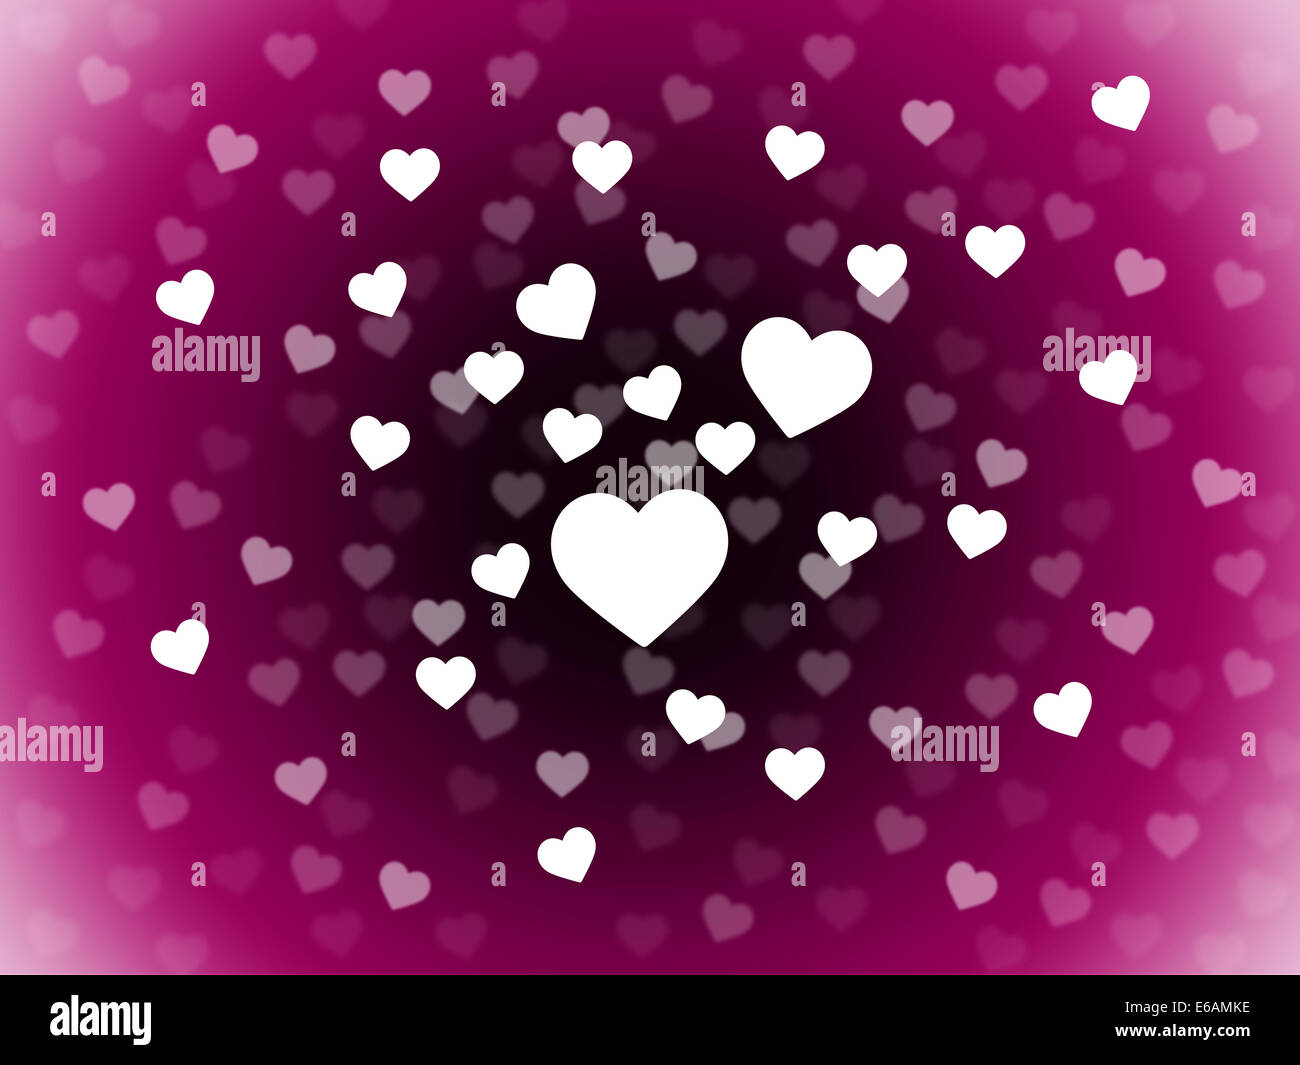 Bunch Of Hearts Background Meaning Attraction Affection And In Love Stock  Photo - Alamy